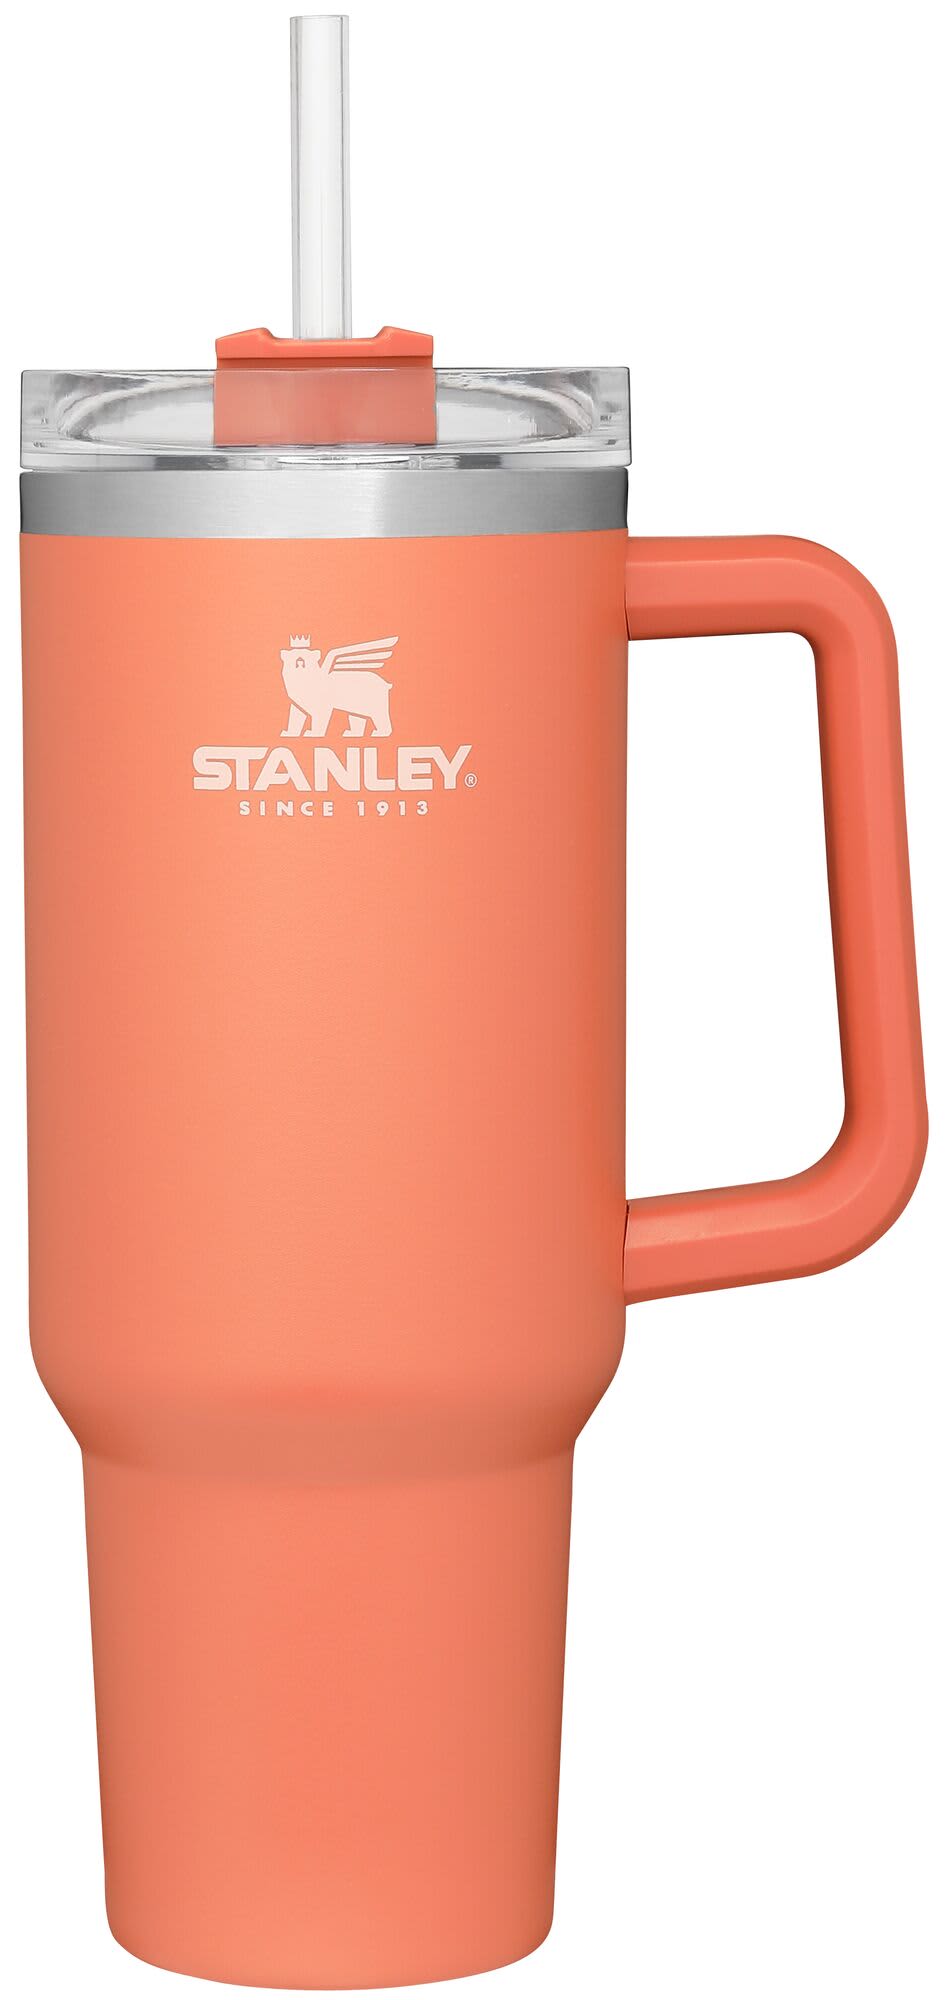 Stanley Quencher Adventure Tumbler Restock Guide: New Colors